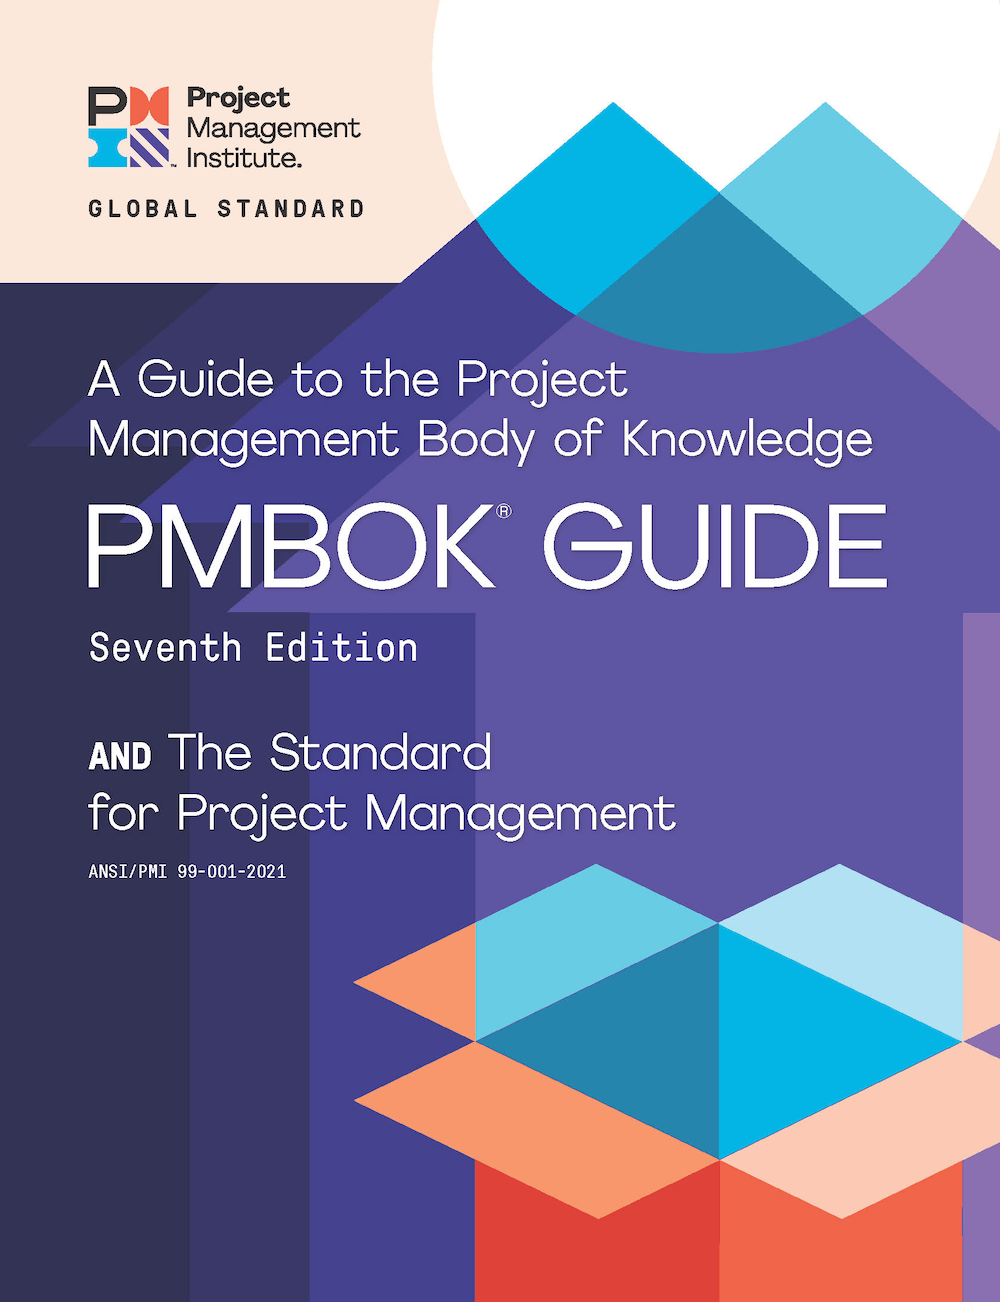 download-pmbok-guide-7th-edition-pdf-free-for-pmi-members-pmp